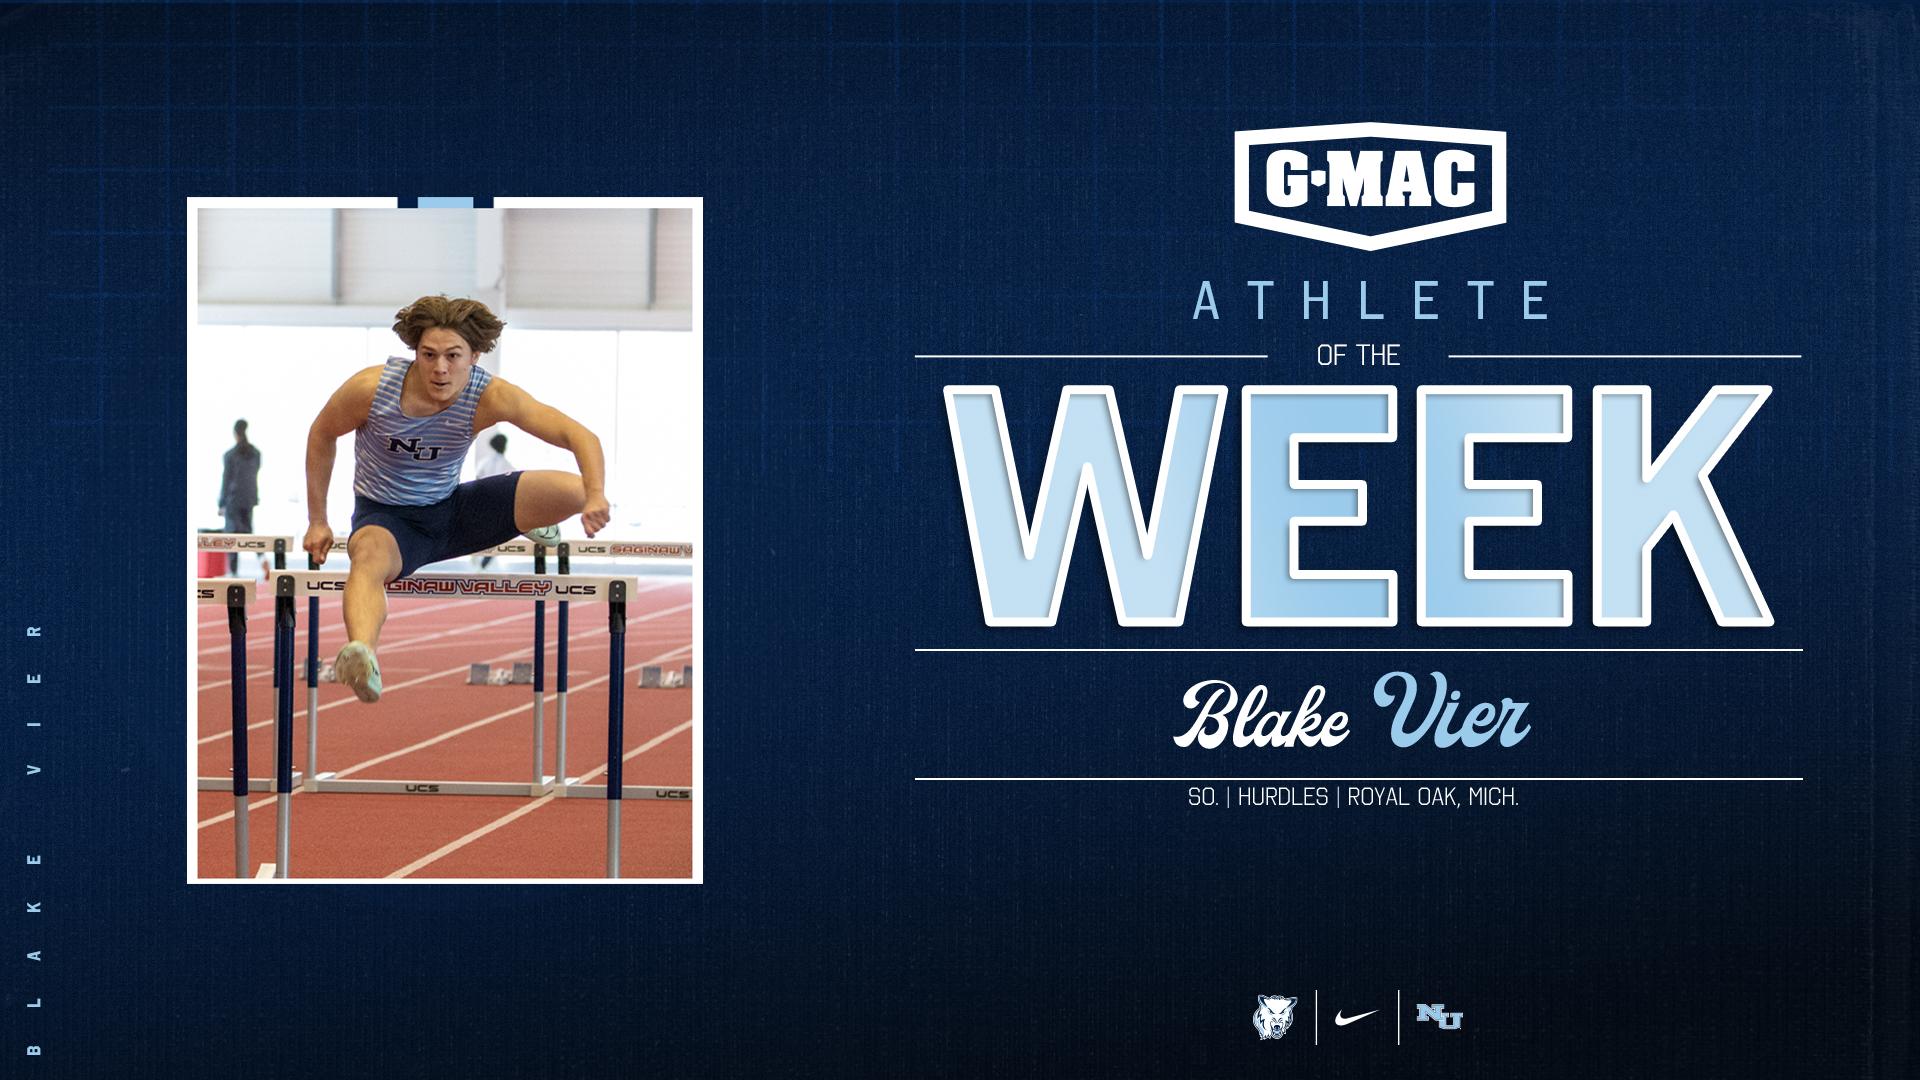 Blake Vier Tabs First Career G-MAC Athlete Of The Week Honor For Track & Field